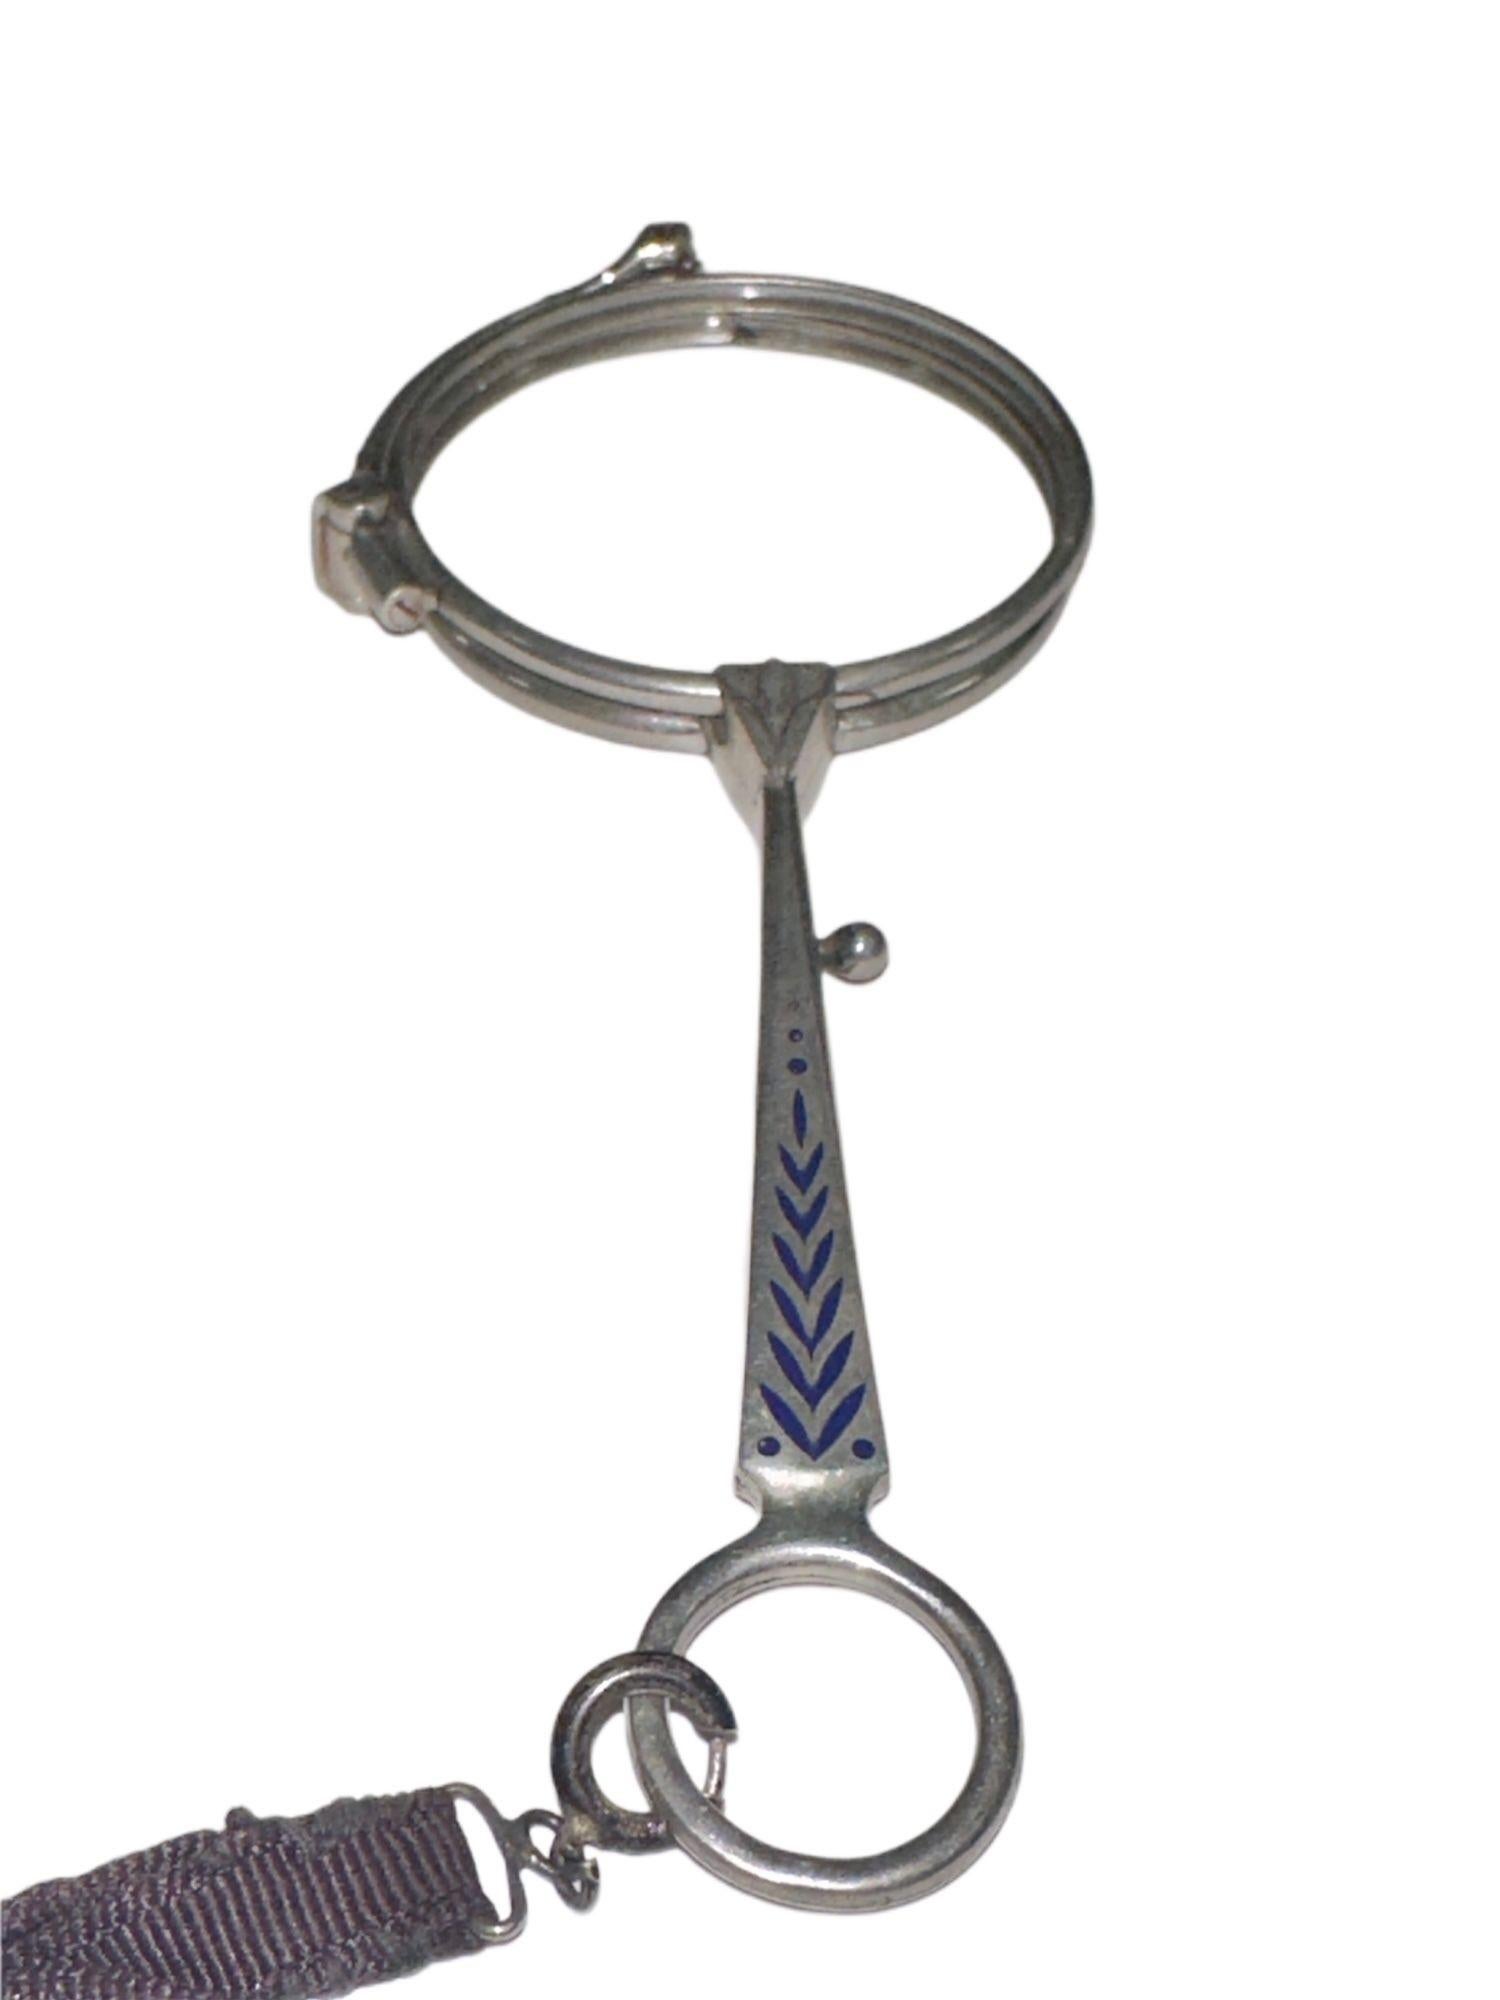 Antique German Lapis Lazuli and Sterling Silver Quick Relase Trigger Lorgnette In Good Condition For Sale In Van Nuys, CA